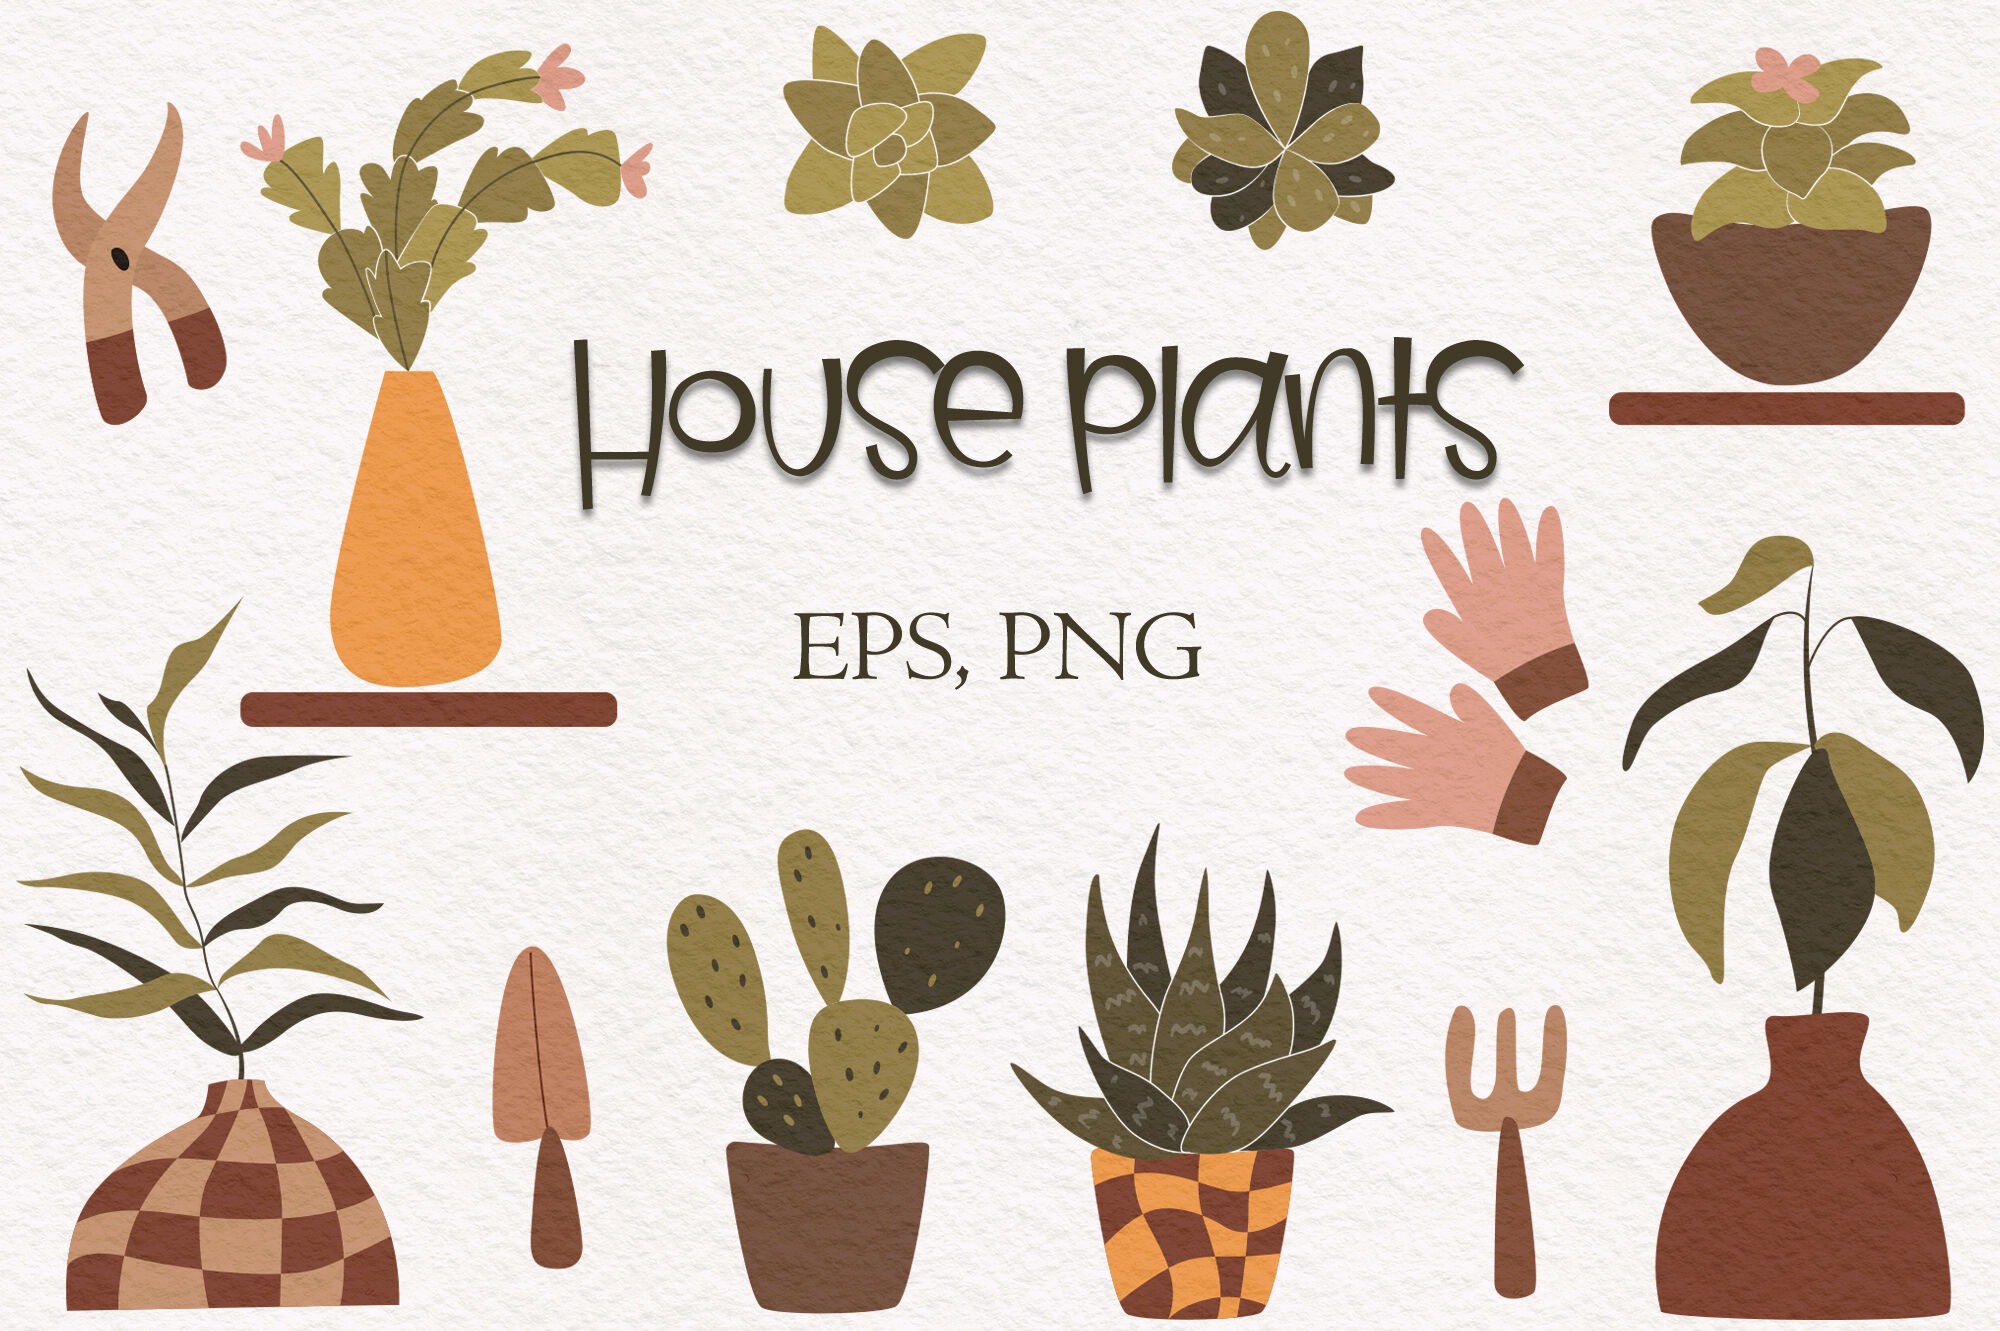 potted plant clip art png